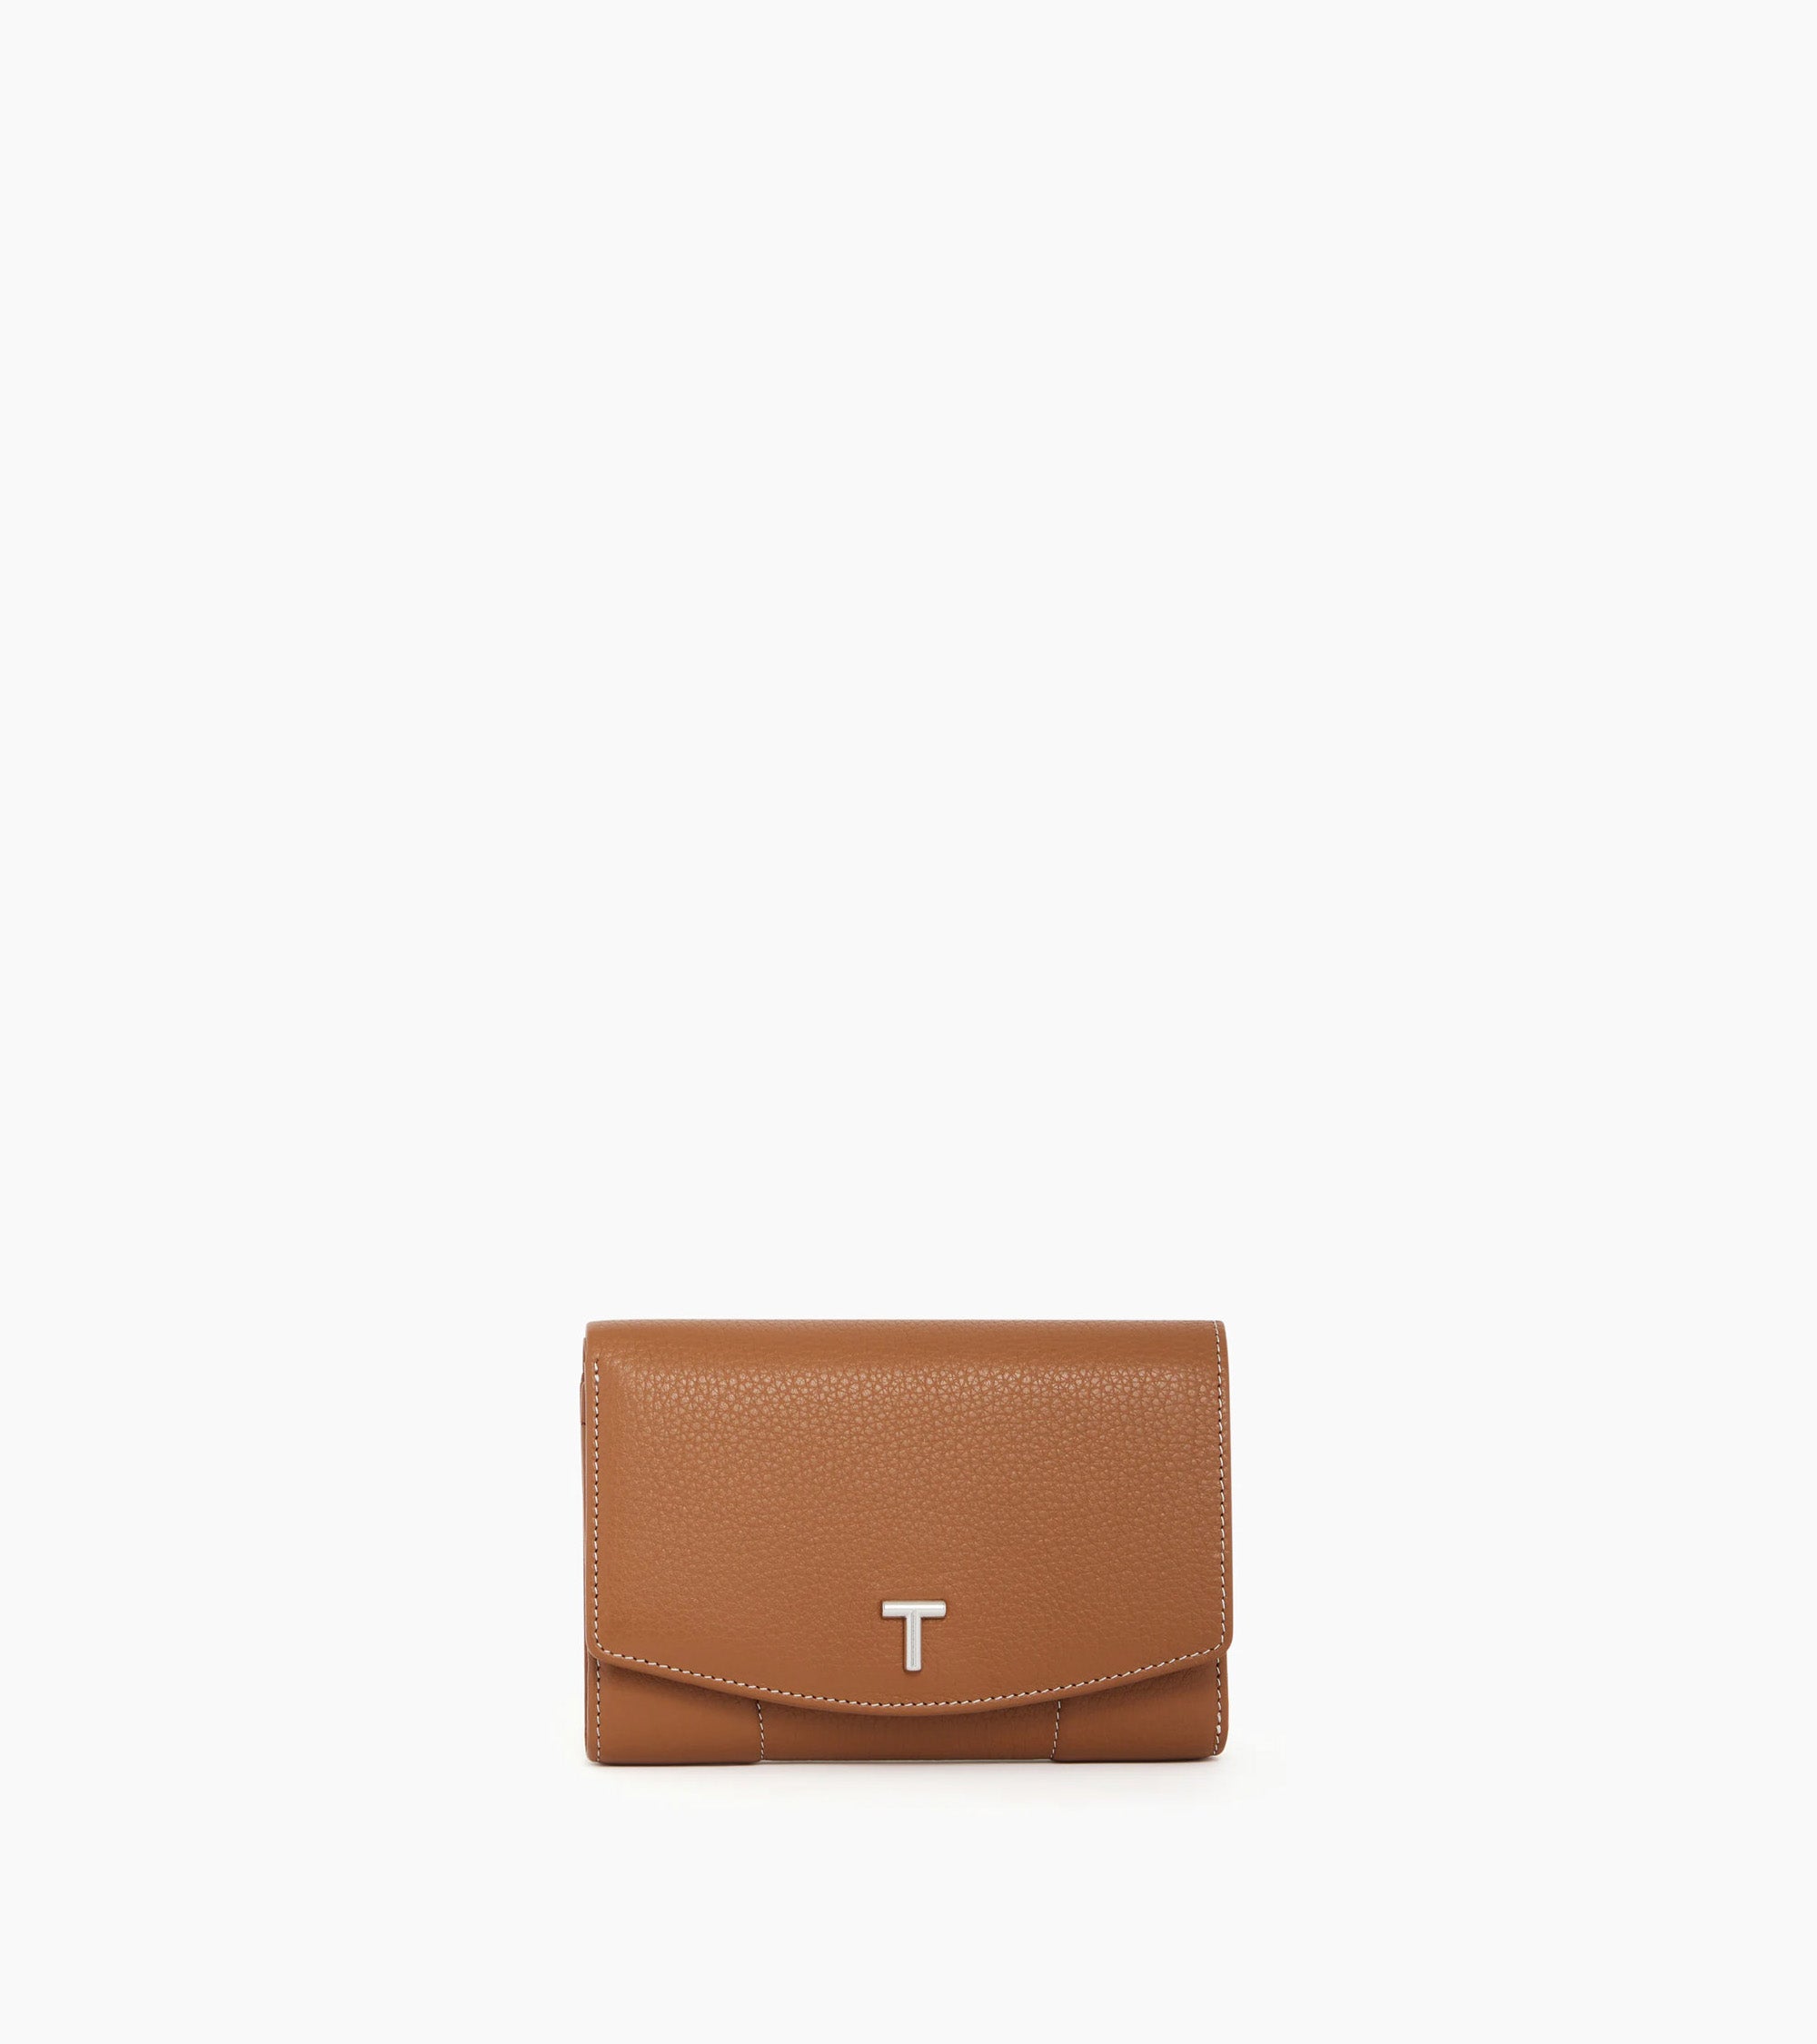 Romy small, zipped wallet in pebbled leather